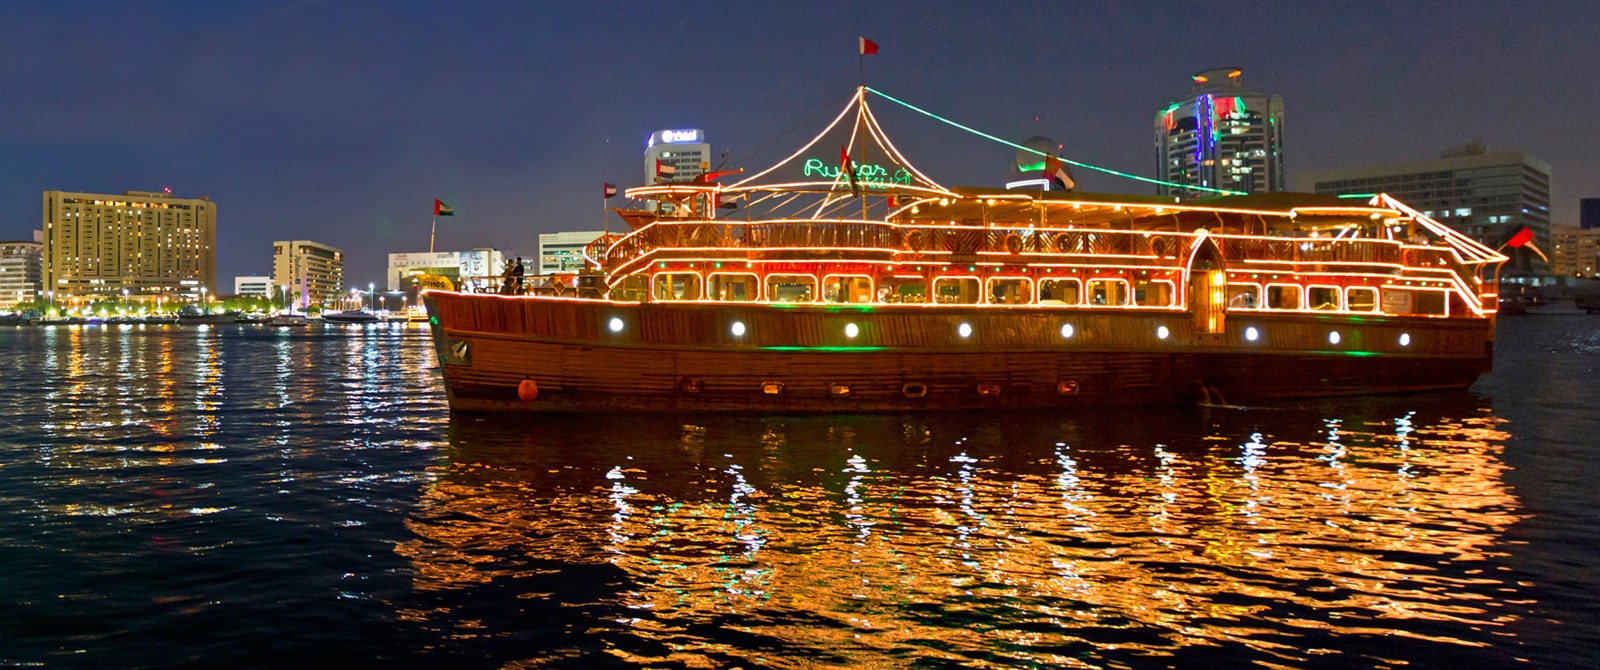 The Best Dhow Cruise In Dubai